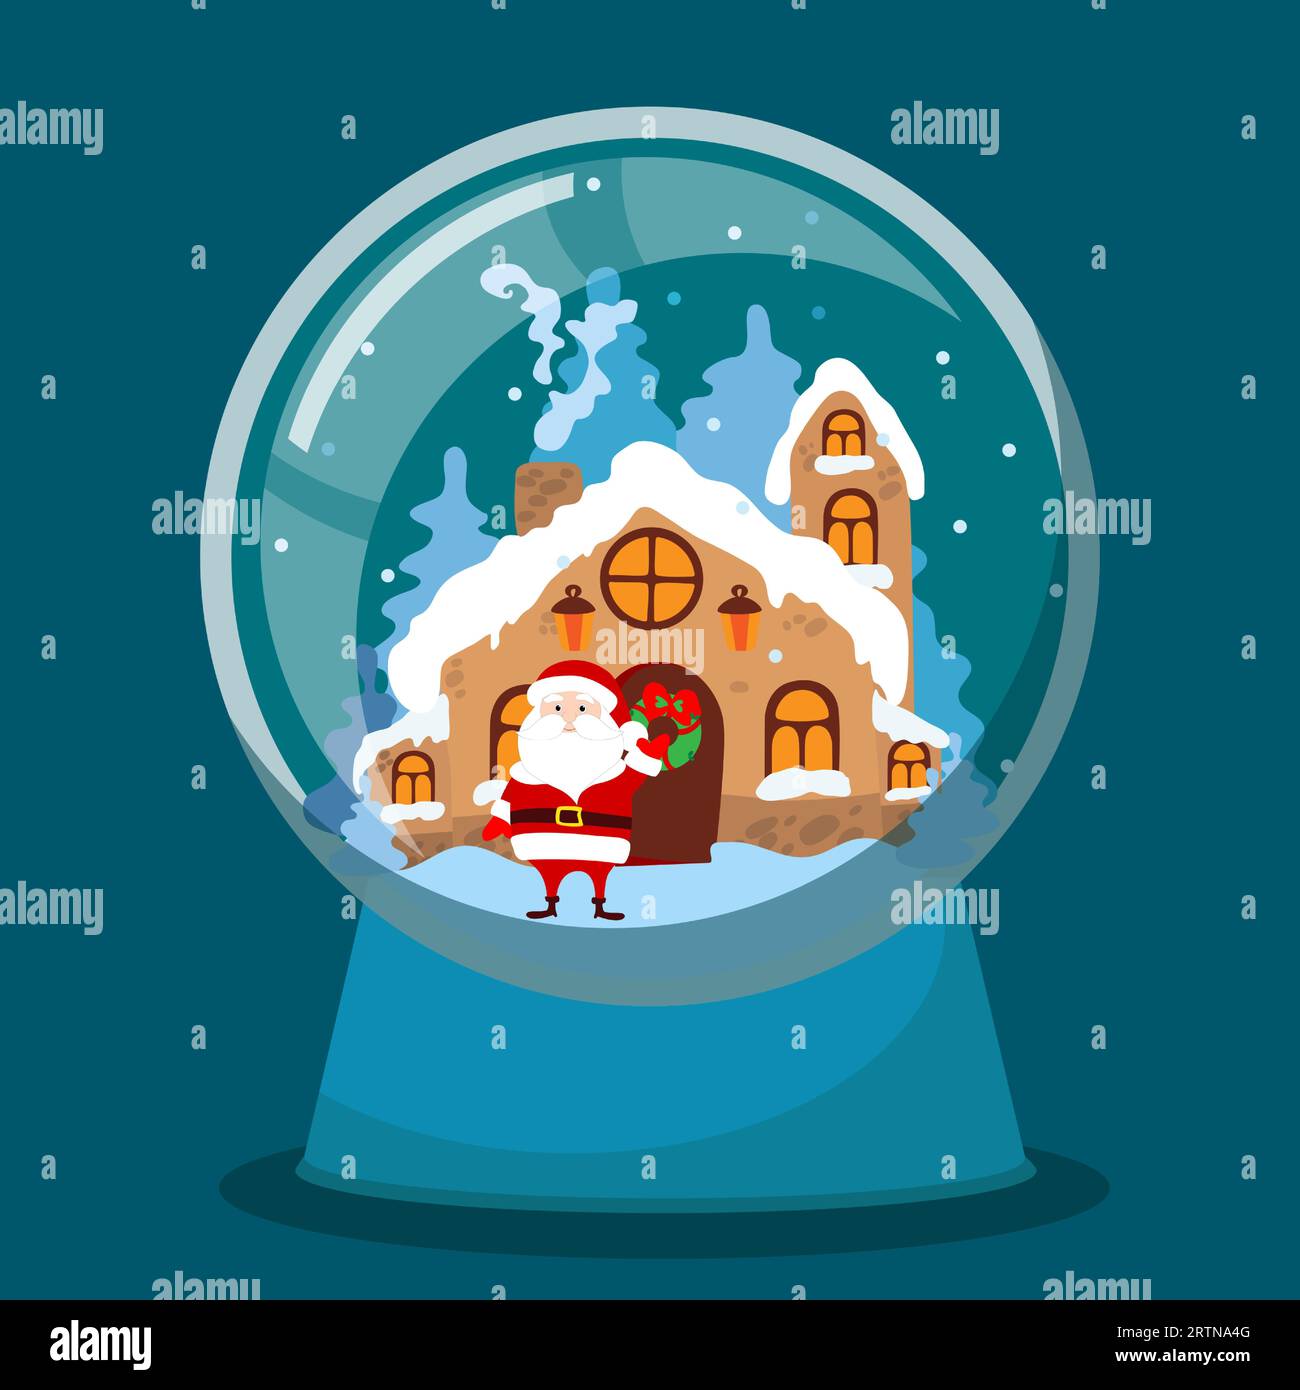 Glass snow globe with Santa Claus inside and his house. Cartoon vector illustration for Christmas greeting cards. There is a place for your text. Stock Vector